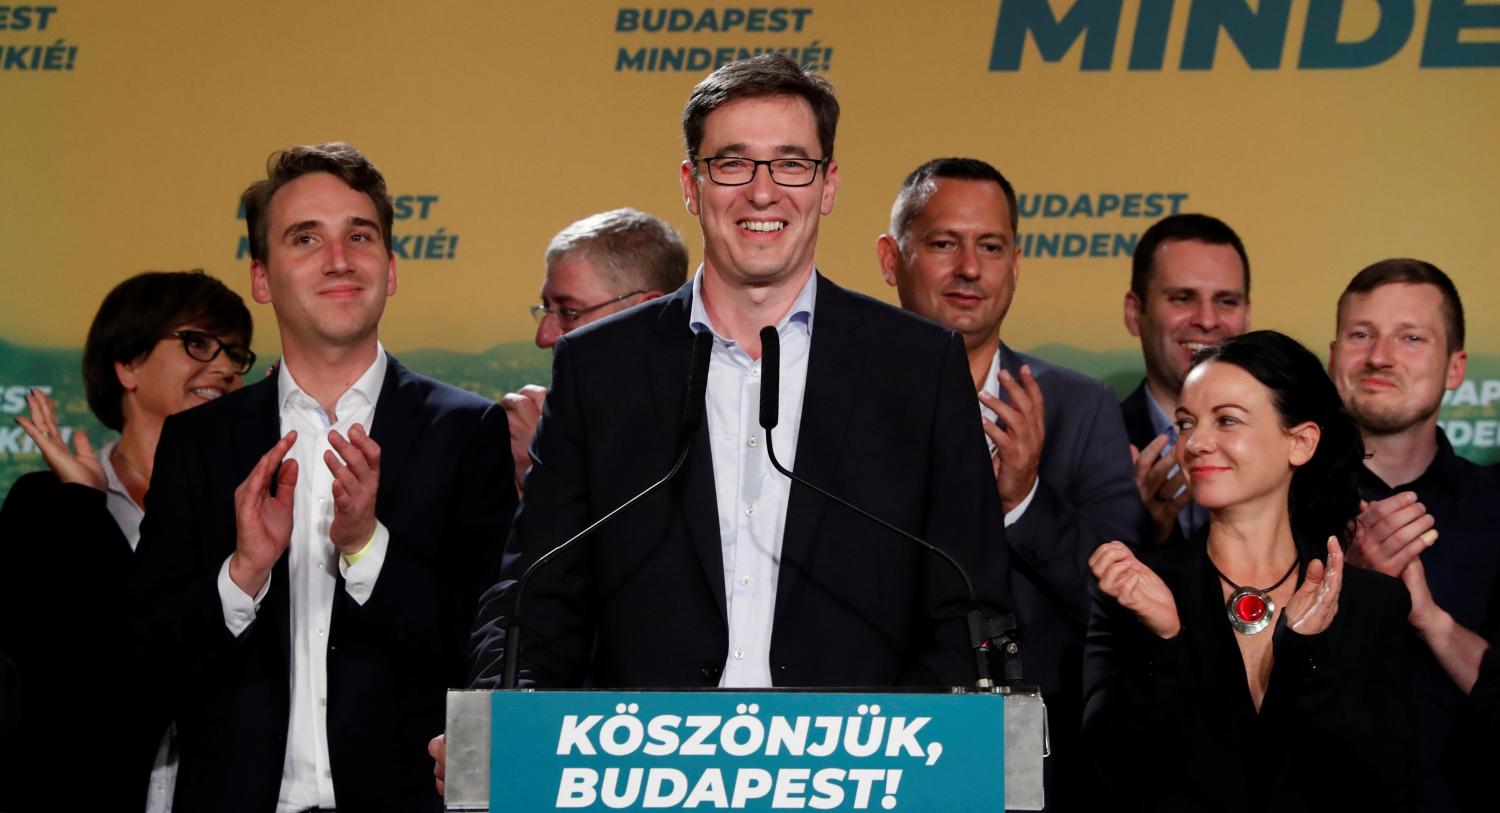 Gergely Karacsony, opposition parties' candidate delivers a statement after his victory after being elected Mayor of Budapest, defeating the ruling party incumbent Istvan Tarlos in Budapest, Hungary, October 13, 2019. REUTERS/Bernadett Szabo - RC1B7E072940